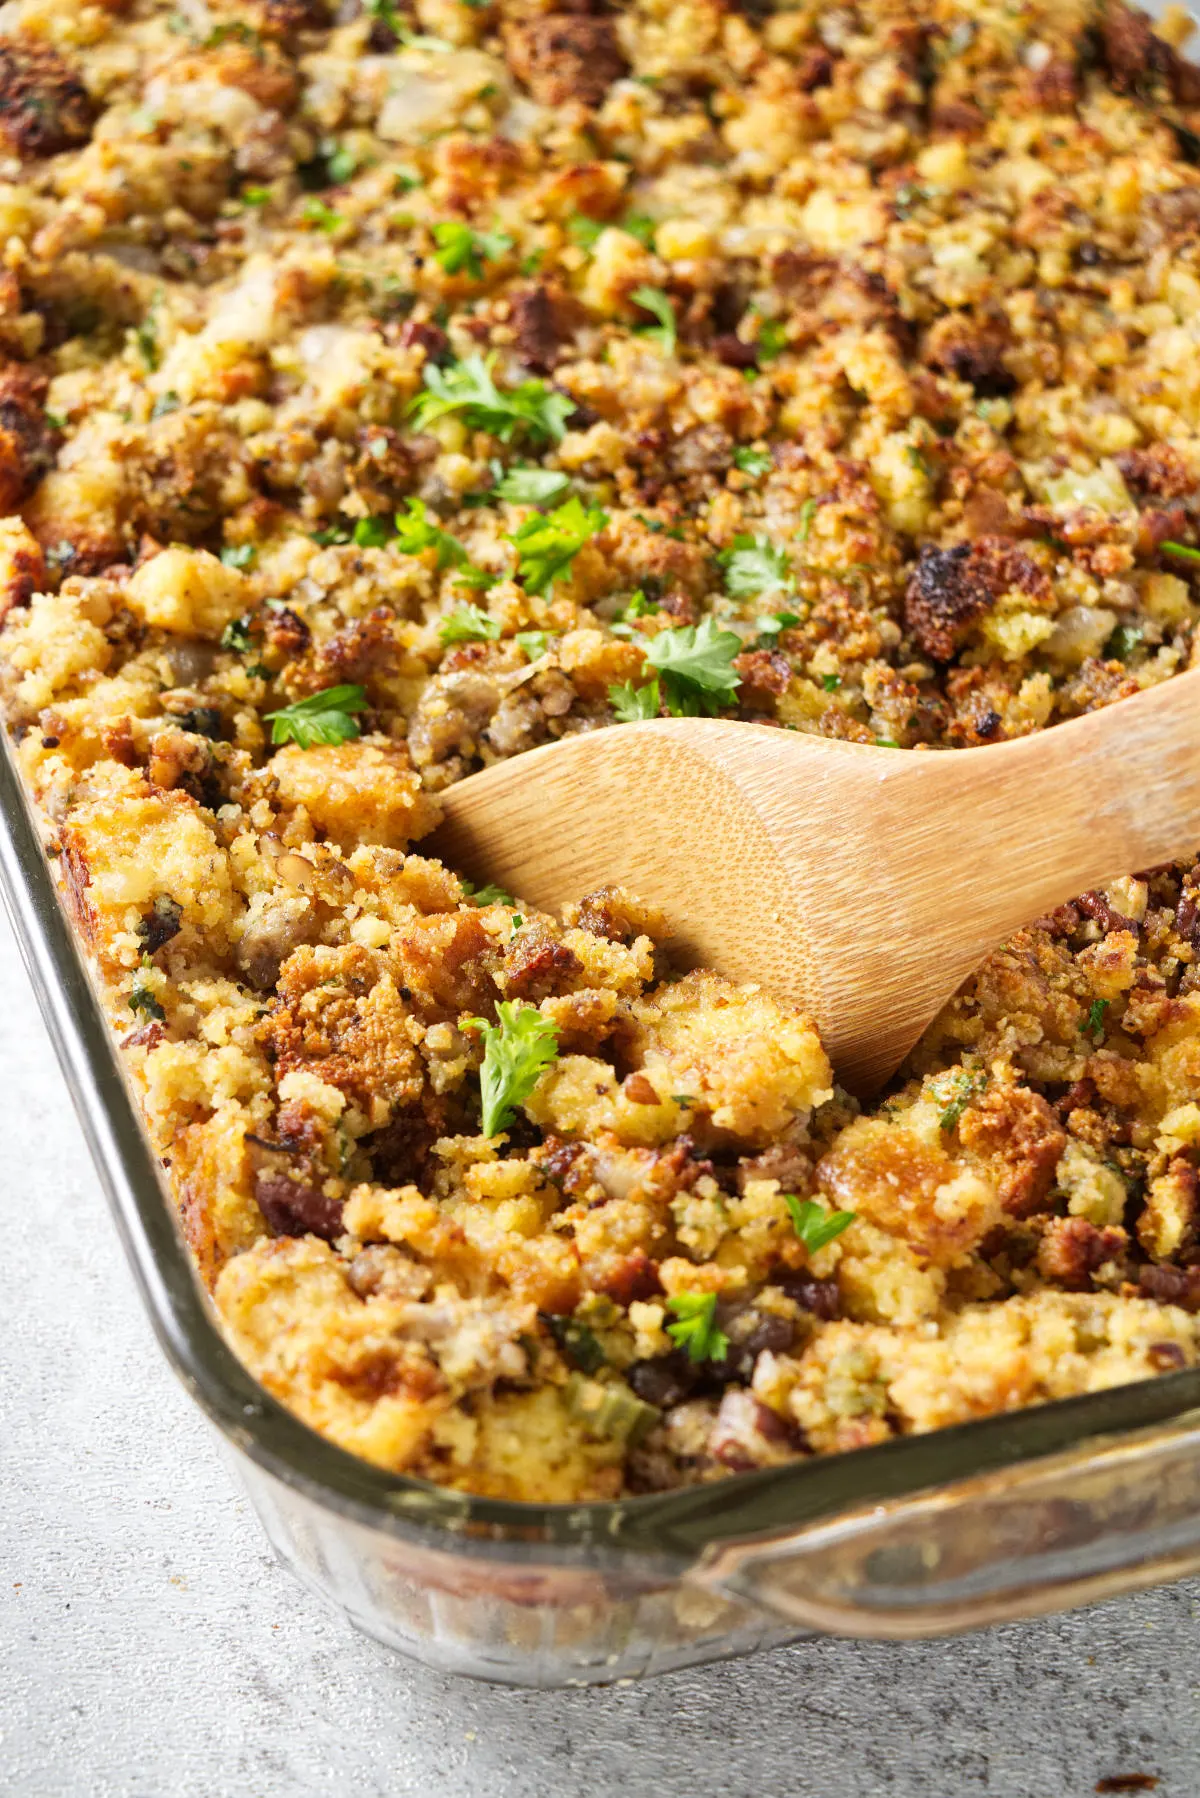 A wooden spoon in a dish of stuffing.